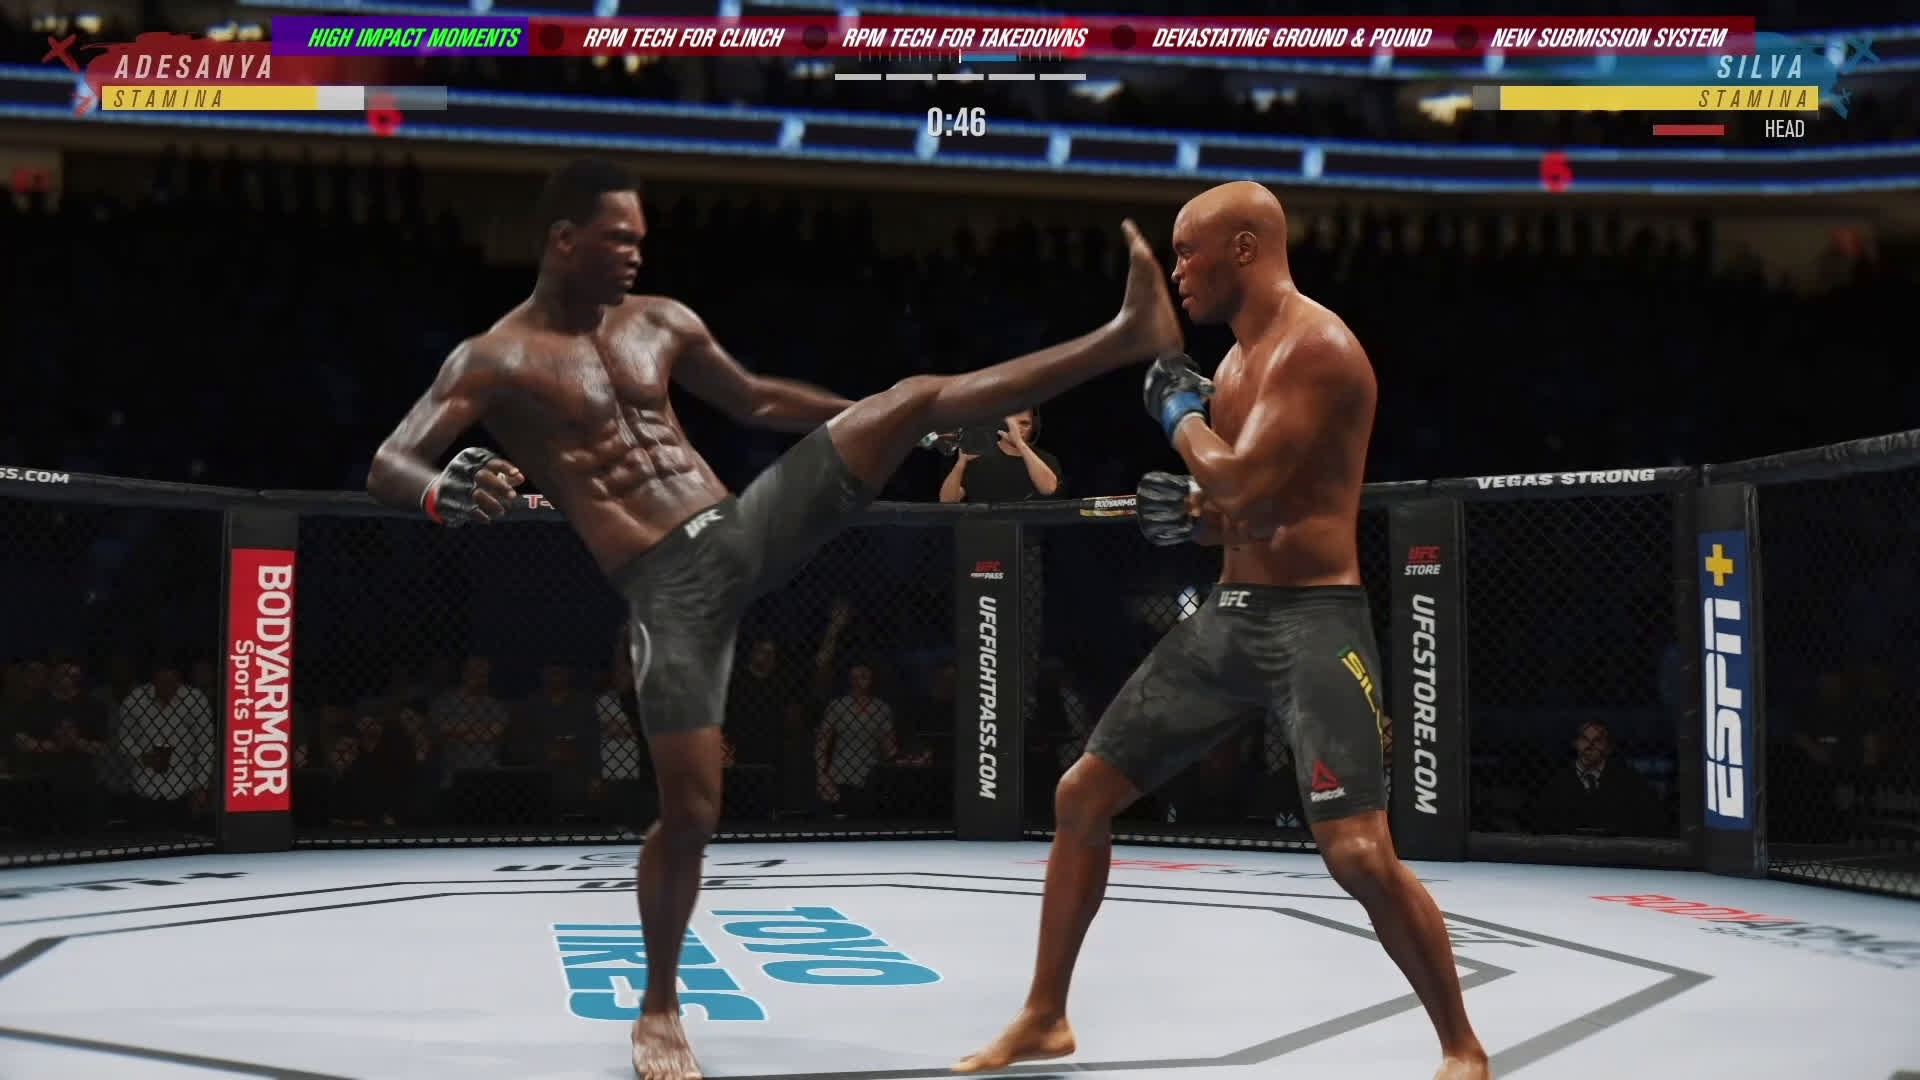 Exploring The UFC Video Game Guide